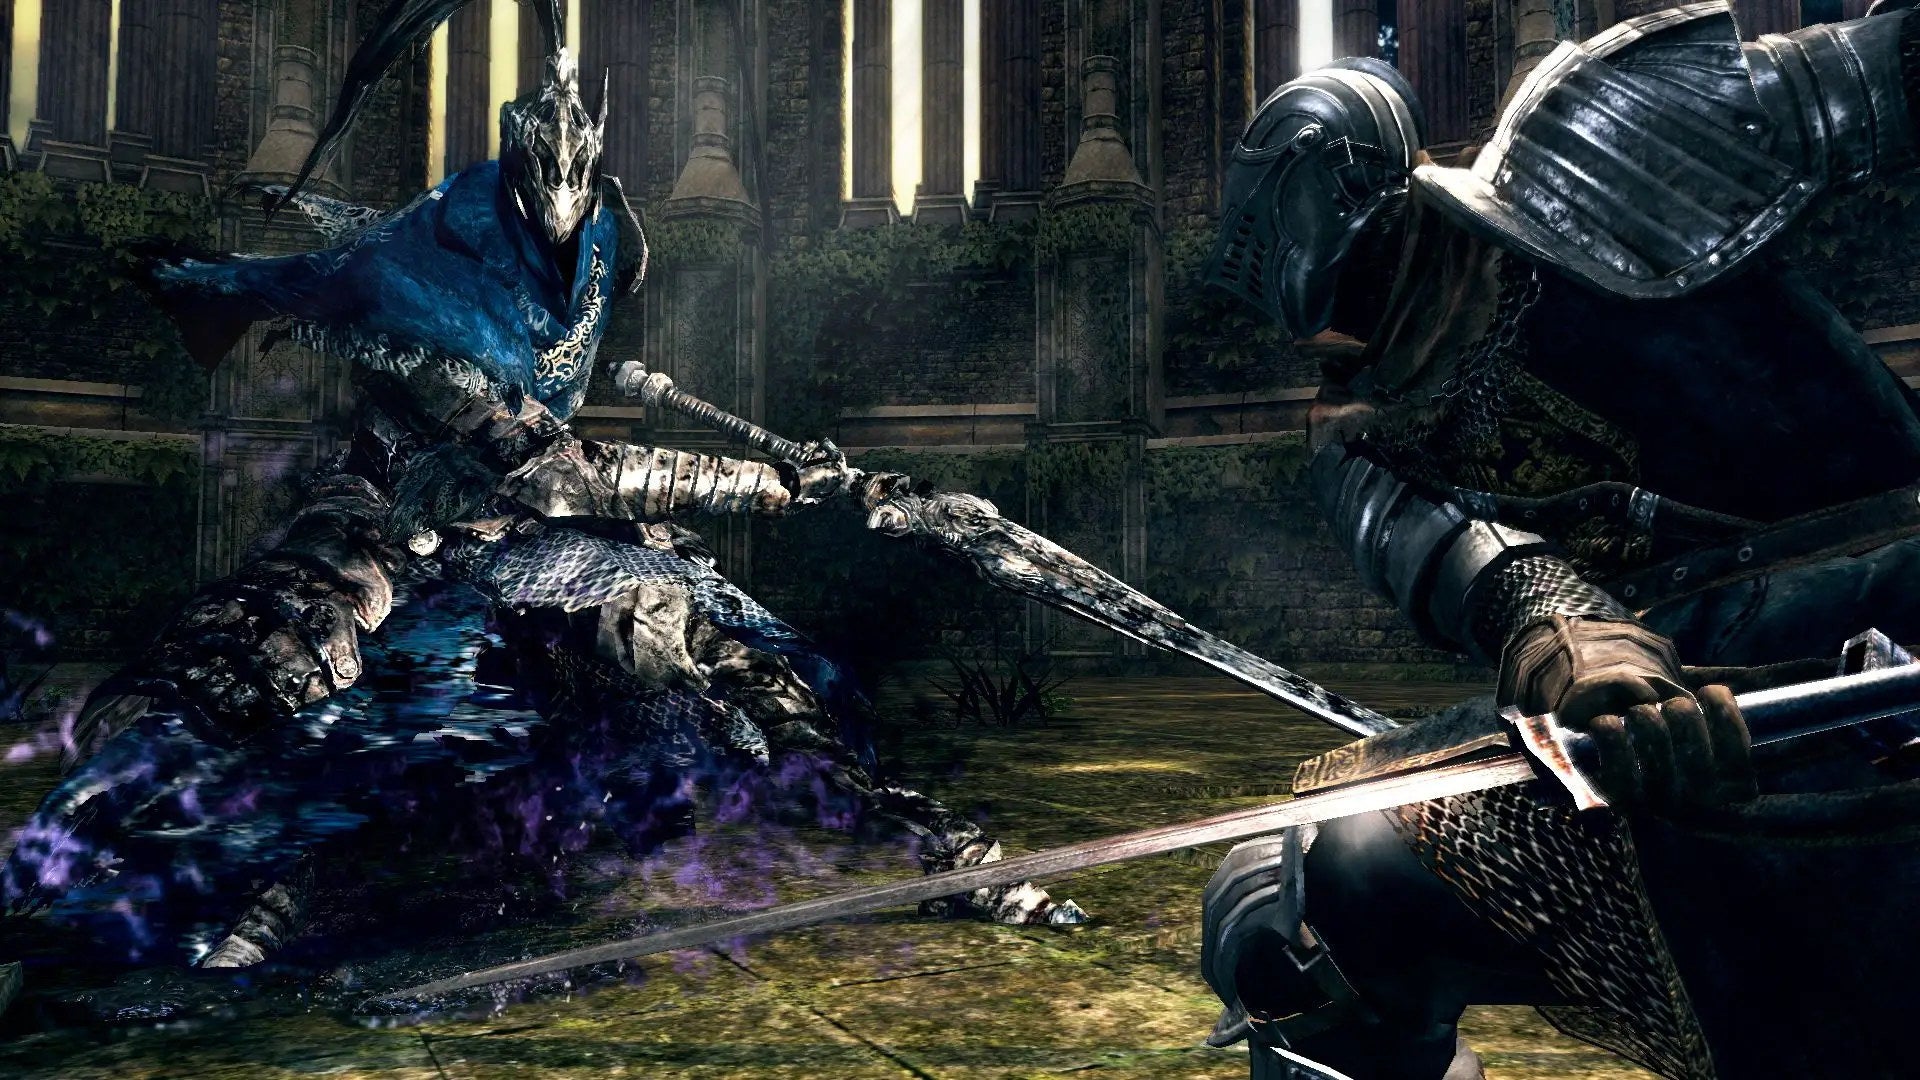 Fighting Artorias of the Abyss in a Dark Souls Remastered screenshot.